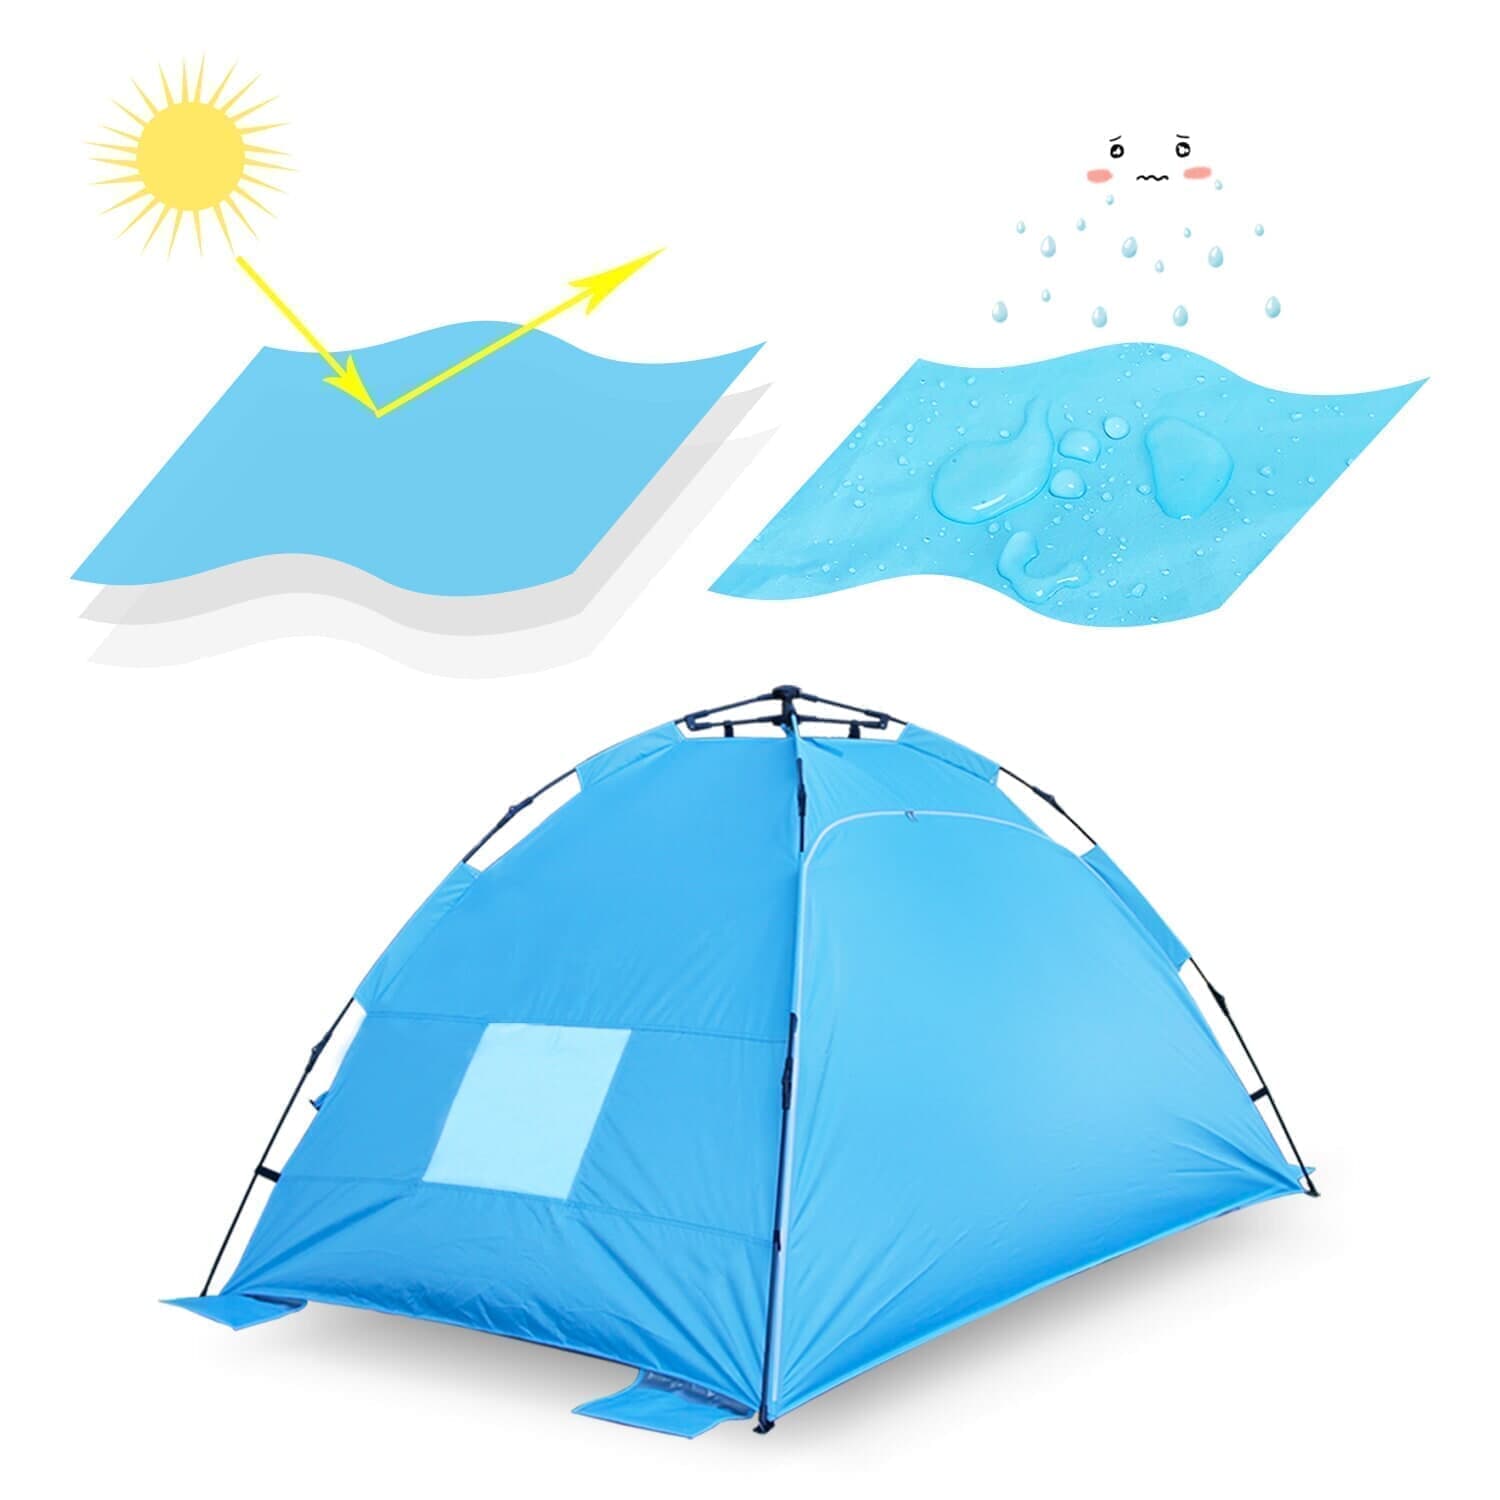 Homfu Sun shelter Beach Tent 3 or 4 Person Automatic Camping Tent with UV Protection pop up Beach Shade for Outdoor Activities Easy Set up ALPIKA Beach Tent Outdoor Camping Tent Sun Shelter Family Tent For 2-4 Person 26.5